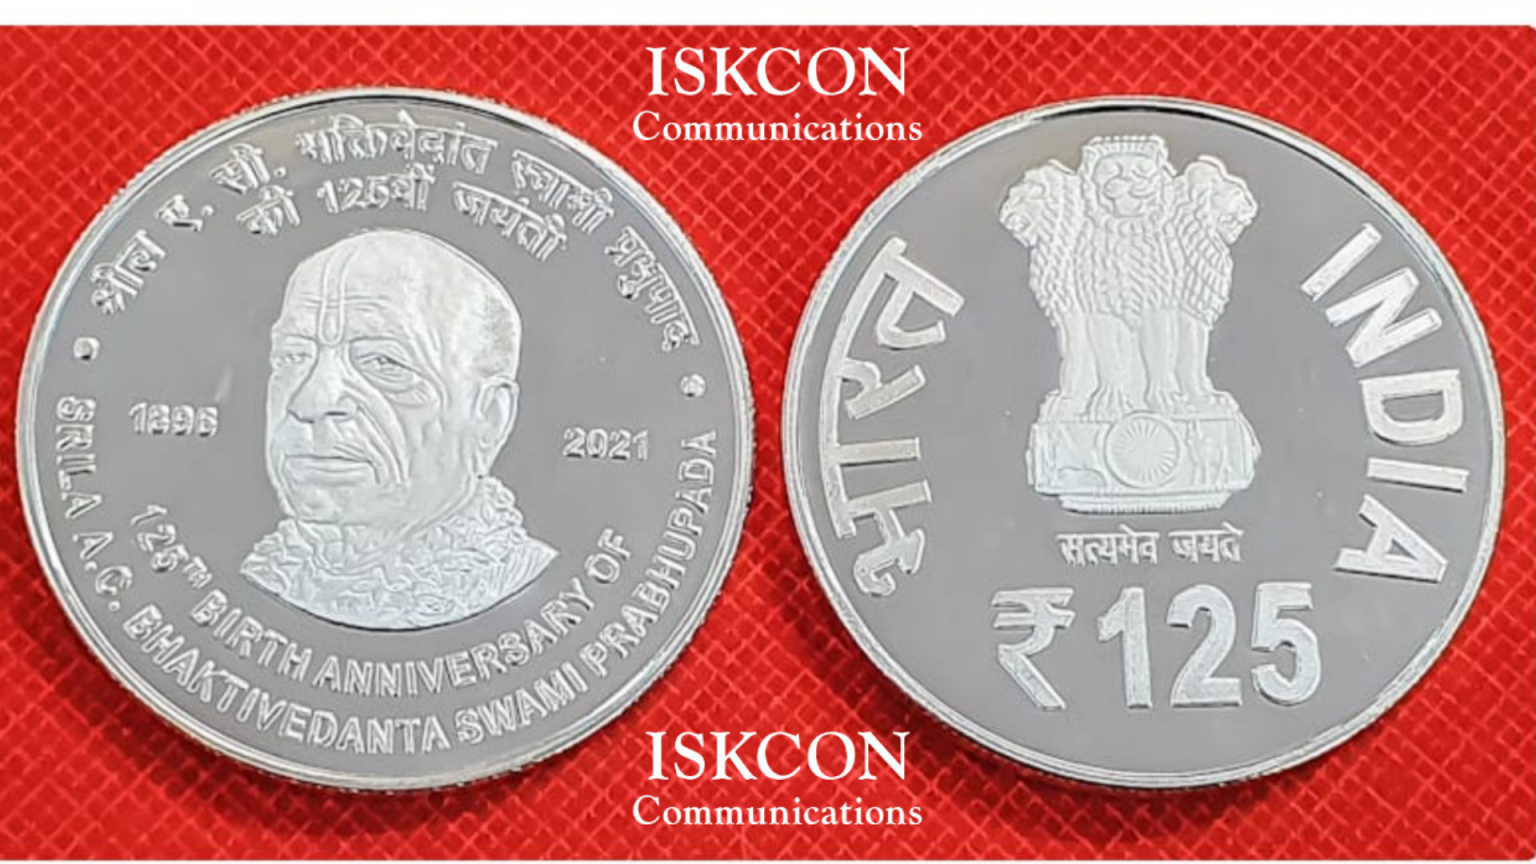 PM Modi unevils special Rs 125 coin on ISKCON founder’s 125th birth anniversary